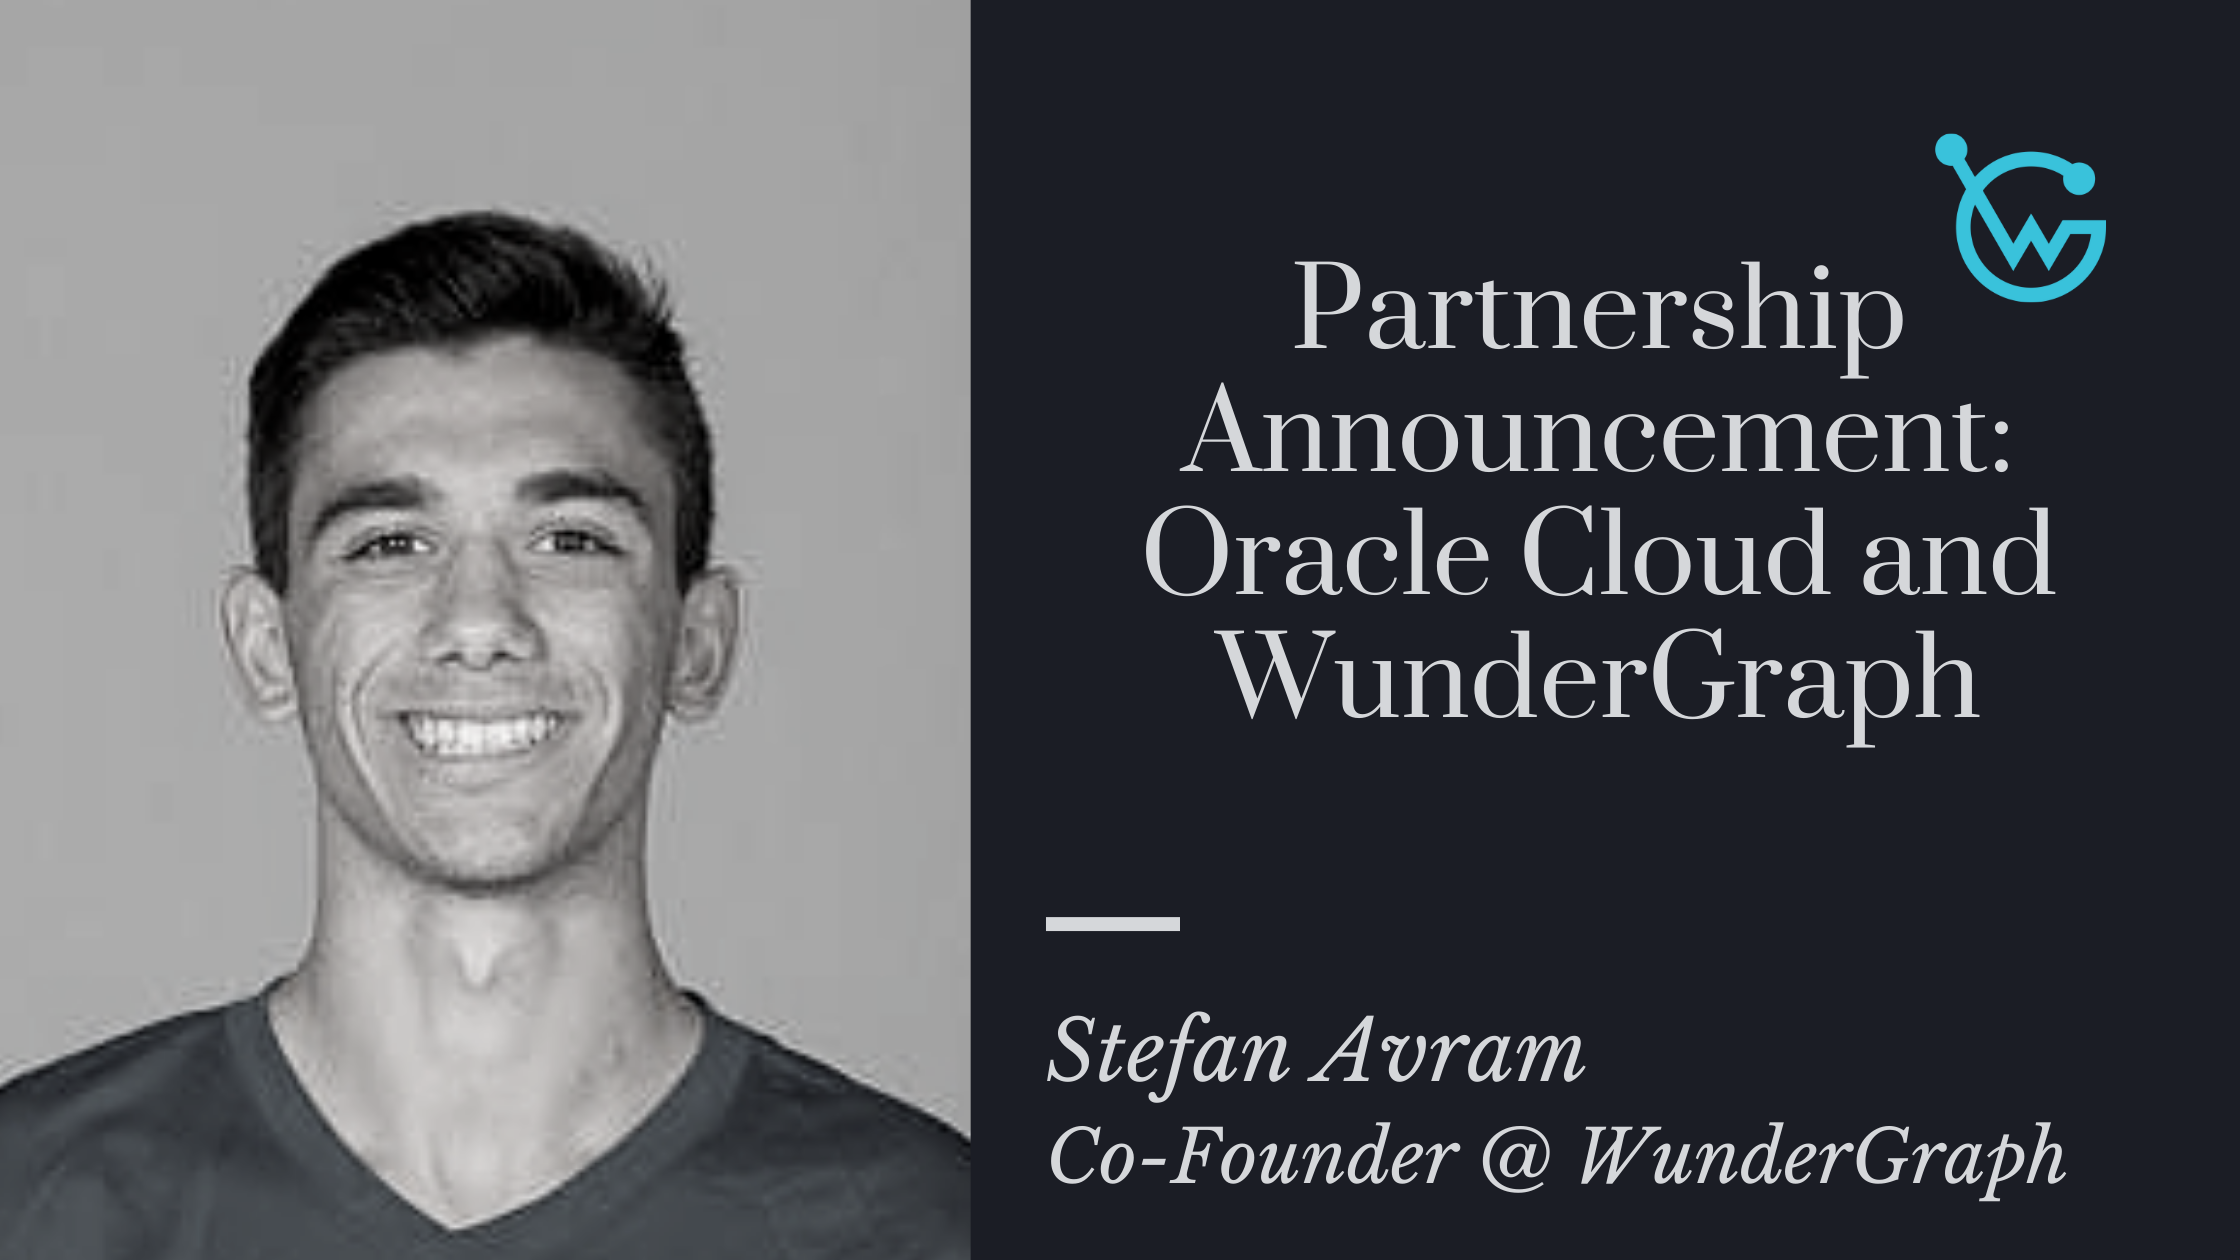 Partnership Announcement: Oracle Cloud and WunderGraph